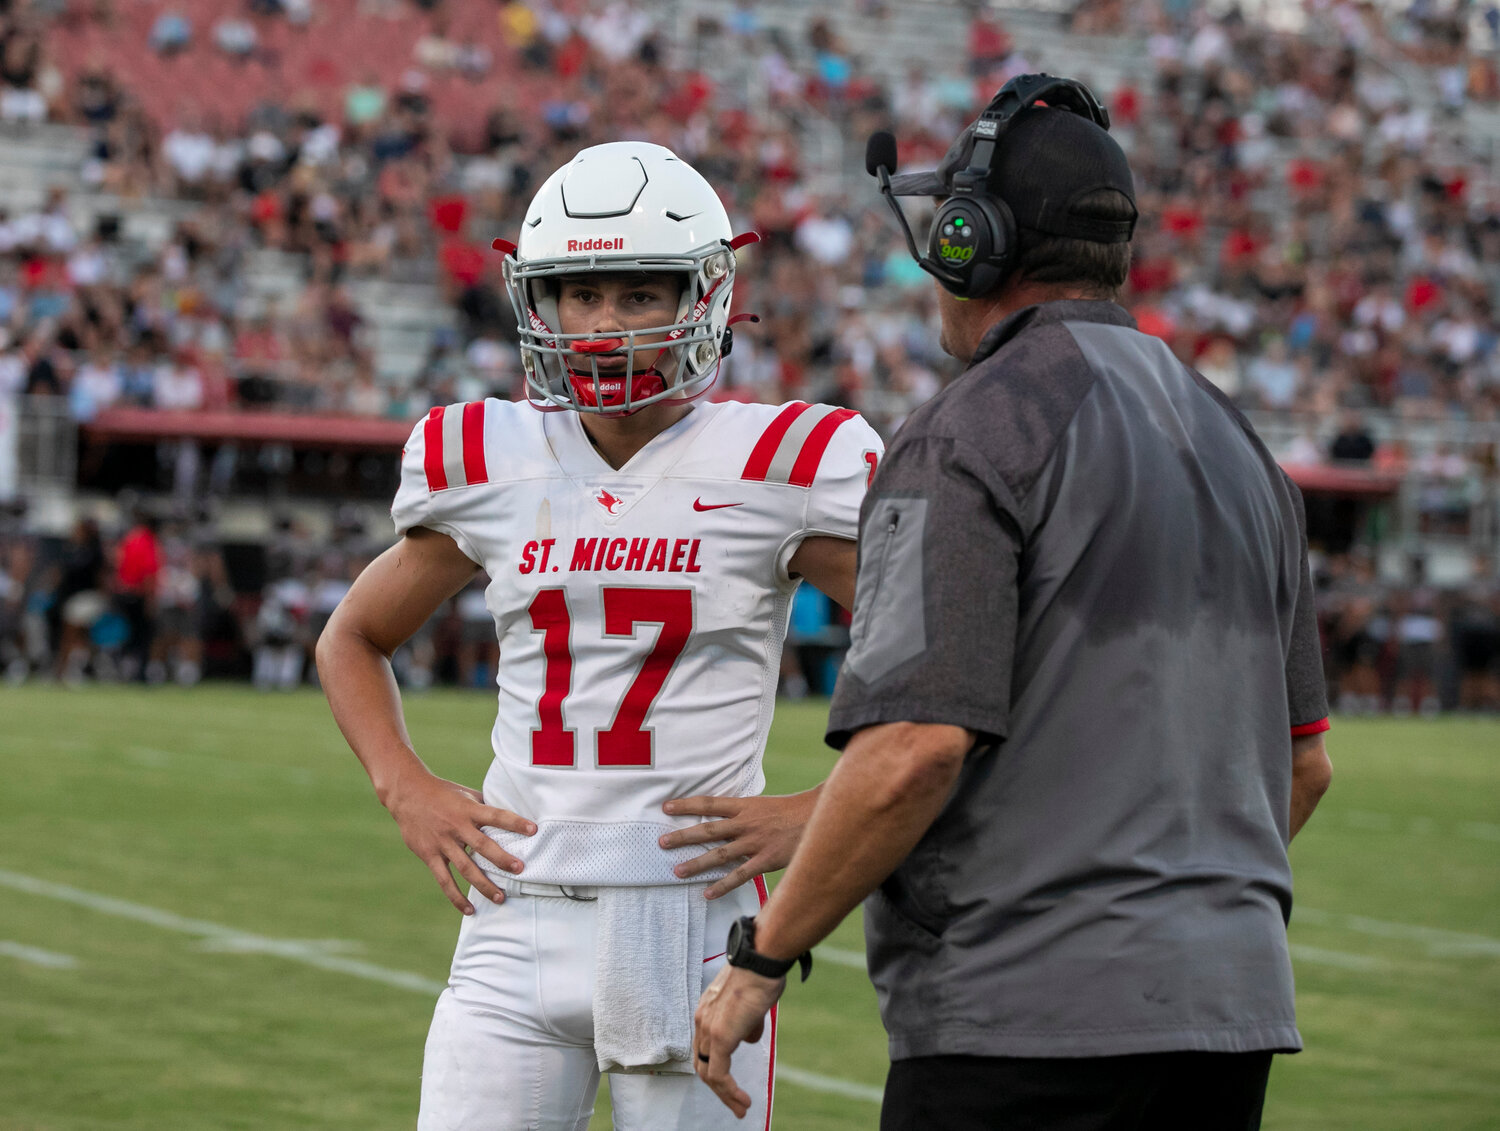 St. Michael Catholic quarterback Gunner Rivers meets with head coach Philip Rivers to get a play call Thursday, Aug. 17, in Spanish Fort during the Cardinals’ jamboree against the Toros. Gunner, a freshman, is set to take over the offense for his father who also wore number 17 over his 17-year NFL career.